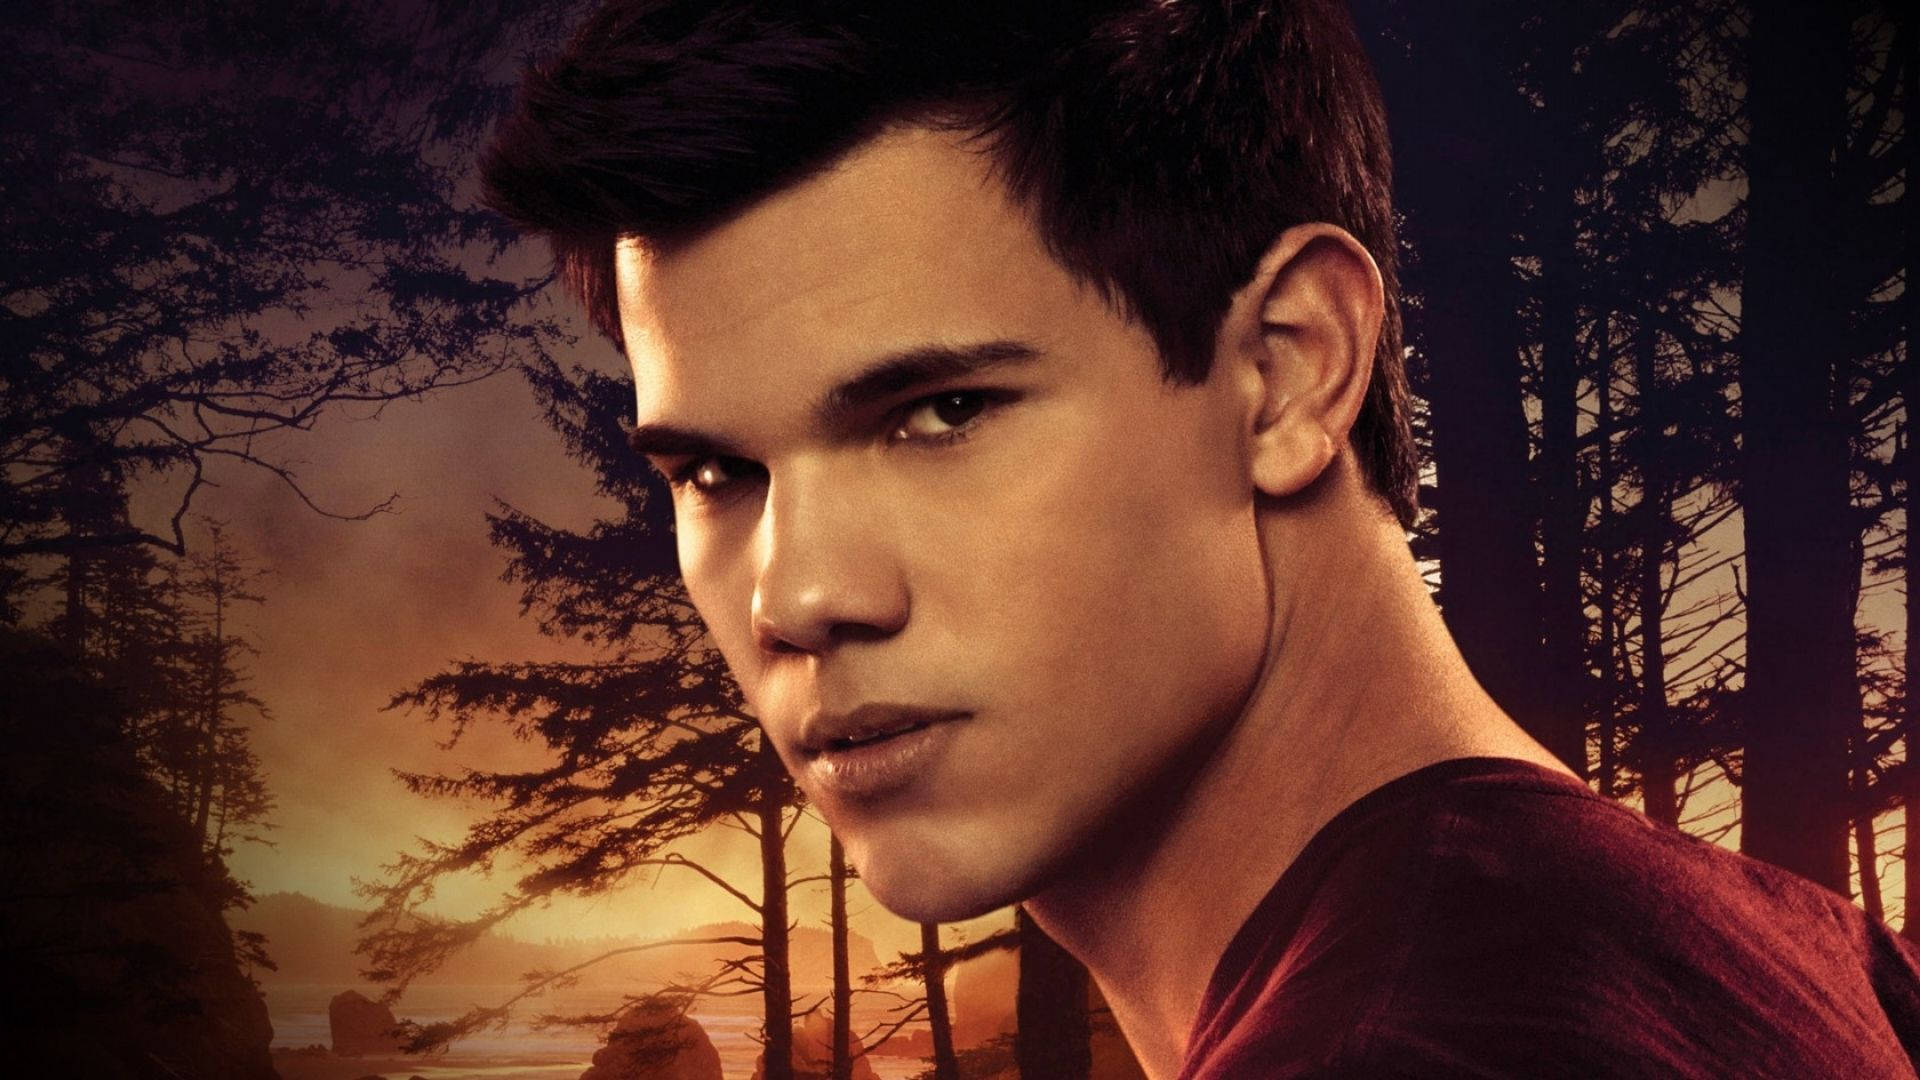 Hollywood Actor Taylor Lautner In Twilight Series